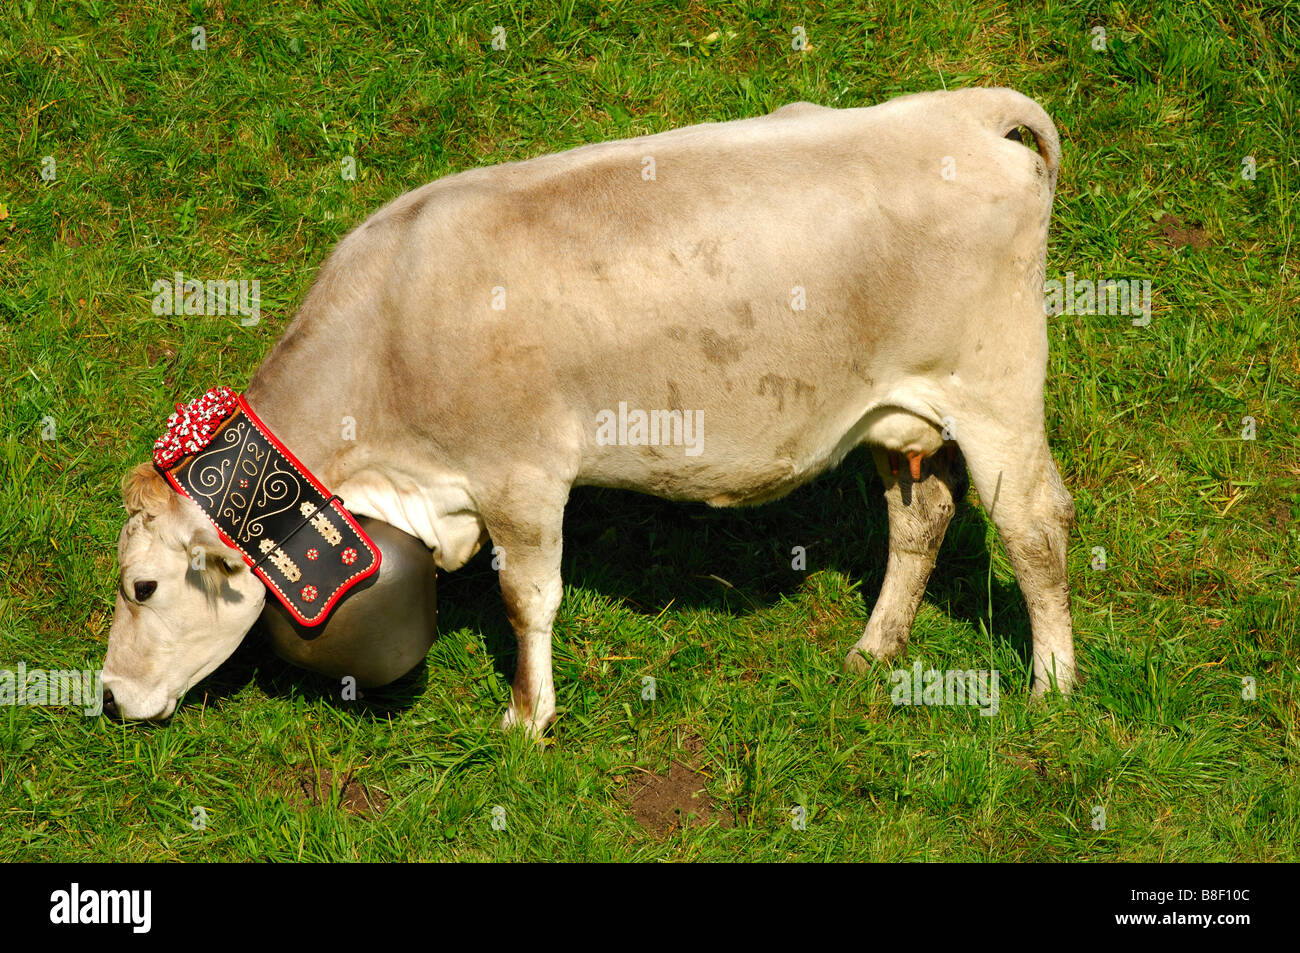 Hornless Swiss Brown cow with a bell around the neck, Switzerland Stock Photo